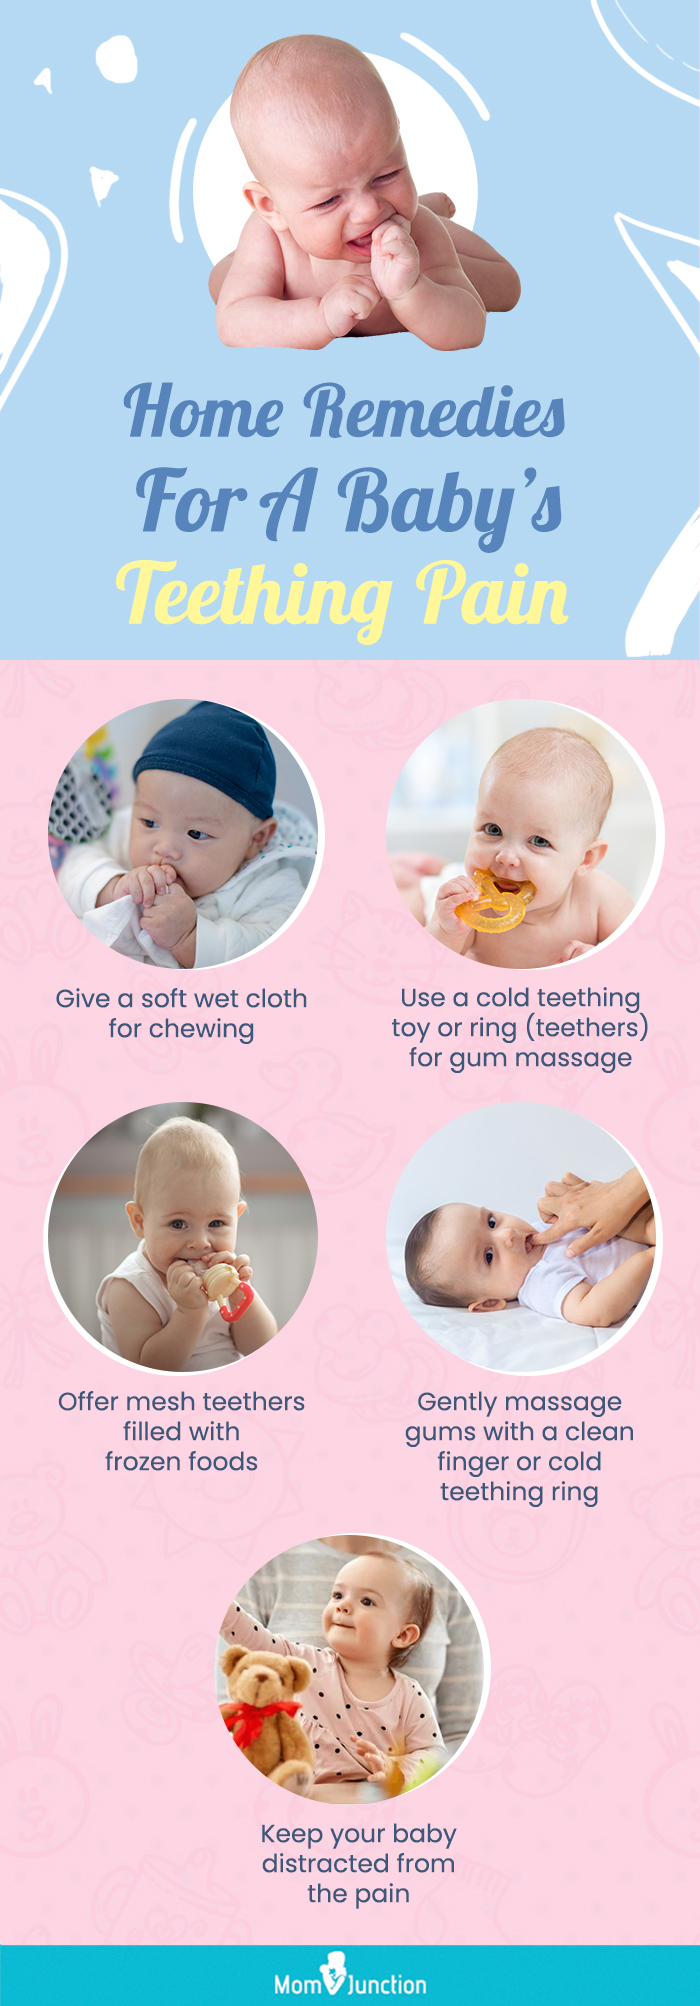 effective treatment methods for baby teething pain (infographic)